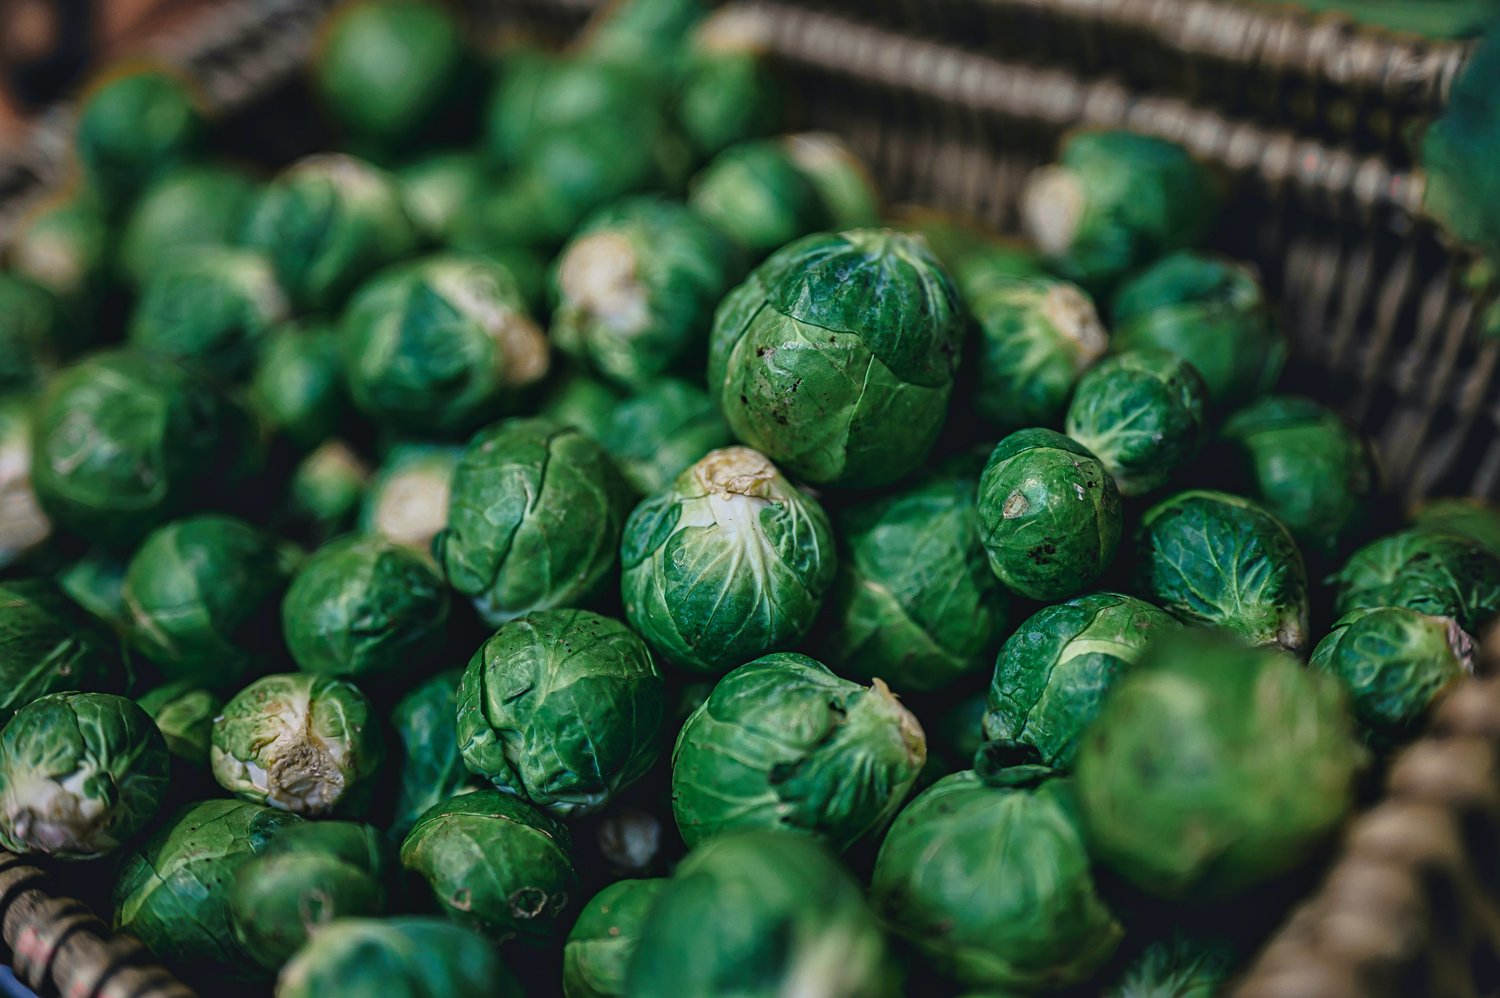 Do not mock the humble sprout. Treated well, it will give you a delicious—and nutritious—side.